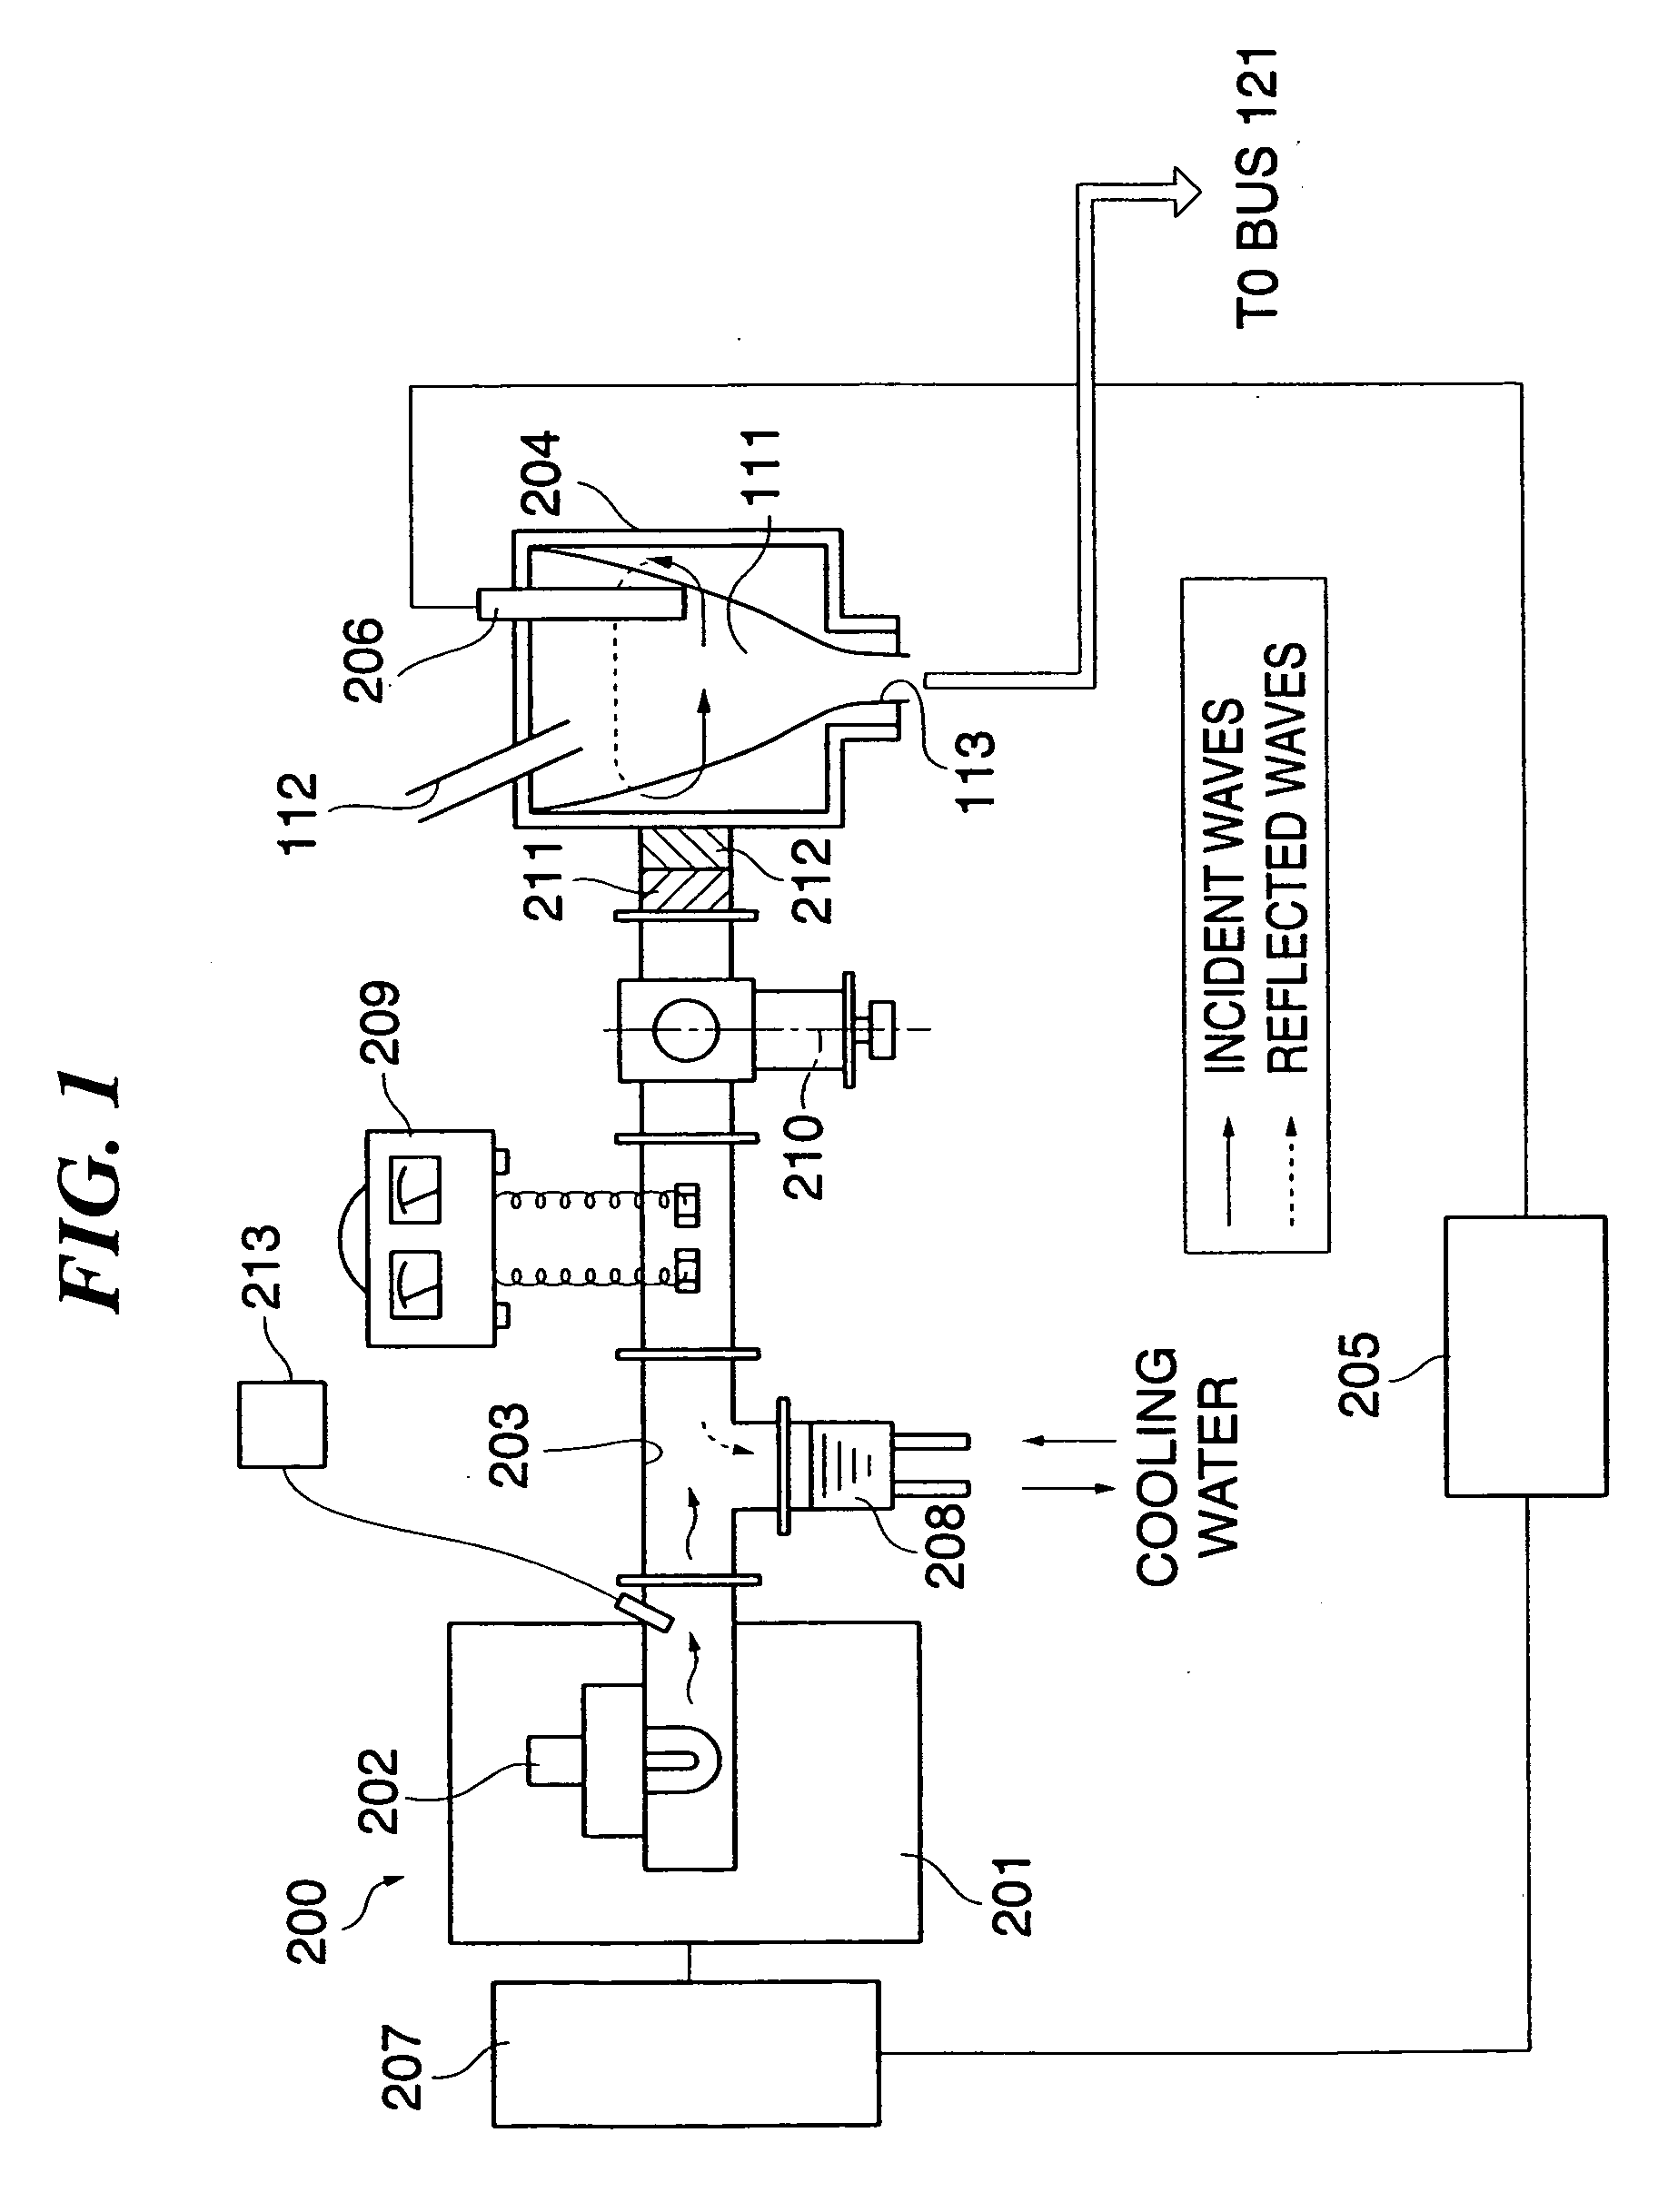 Glass melting apparatus and glass melting method